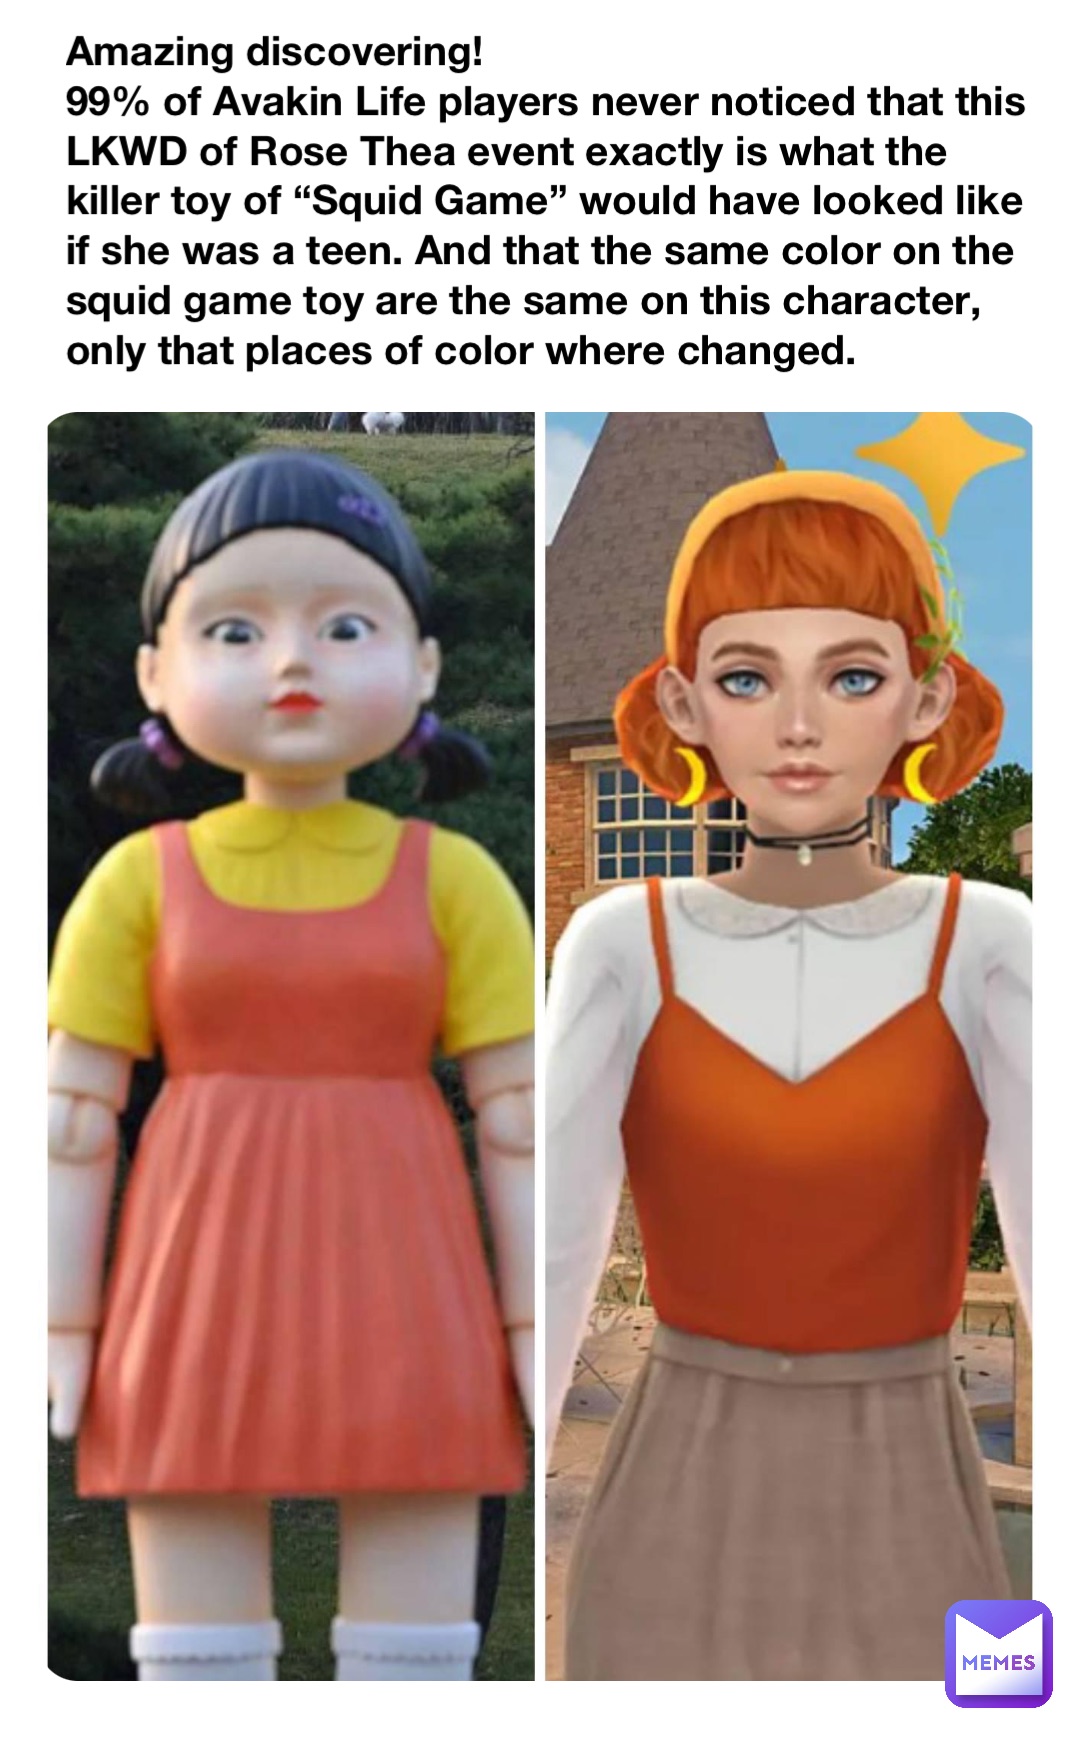 Amazing discovering!
99% of Avakin Life players never noticed that this LKWD of Rose Thea event exactly is what the killer toy of “Squid Game” would have looked like if she was a teen. And that the same color on the squid game toy are the same on this character, only that places of color where changed.